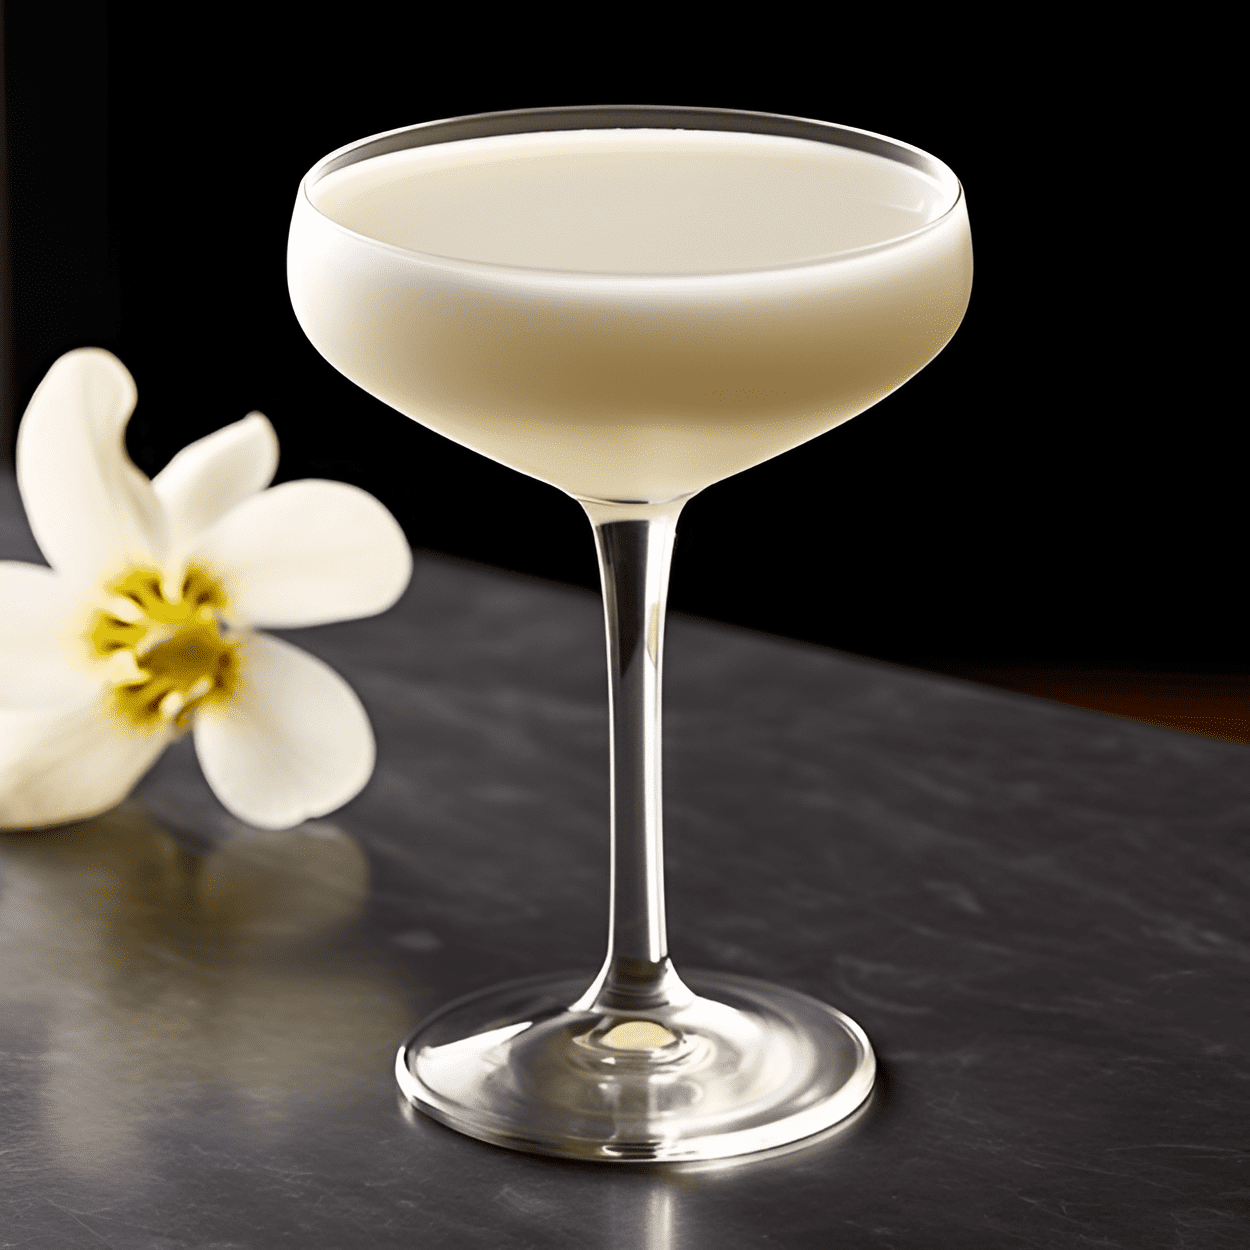 White Lotus Cocktail Recipe - The White Lotus is a sweet, fruity cocktail with a tropical twist. It has a smooth, creamy texture and a refreshing, citrusy finish.